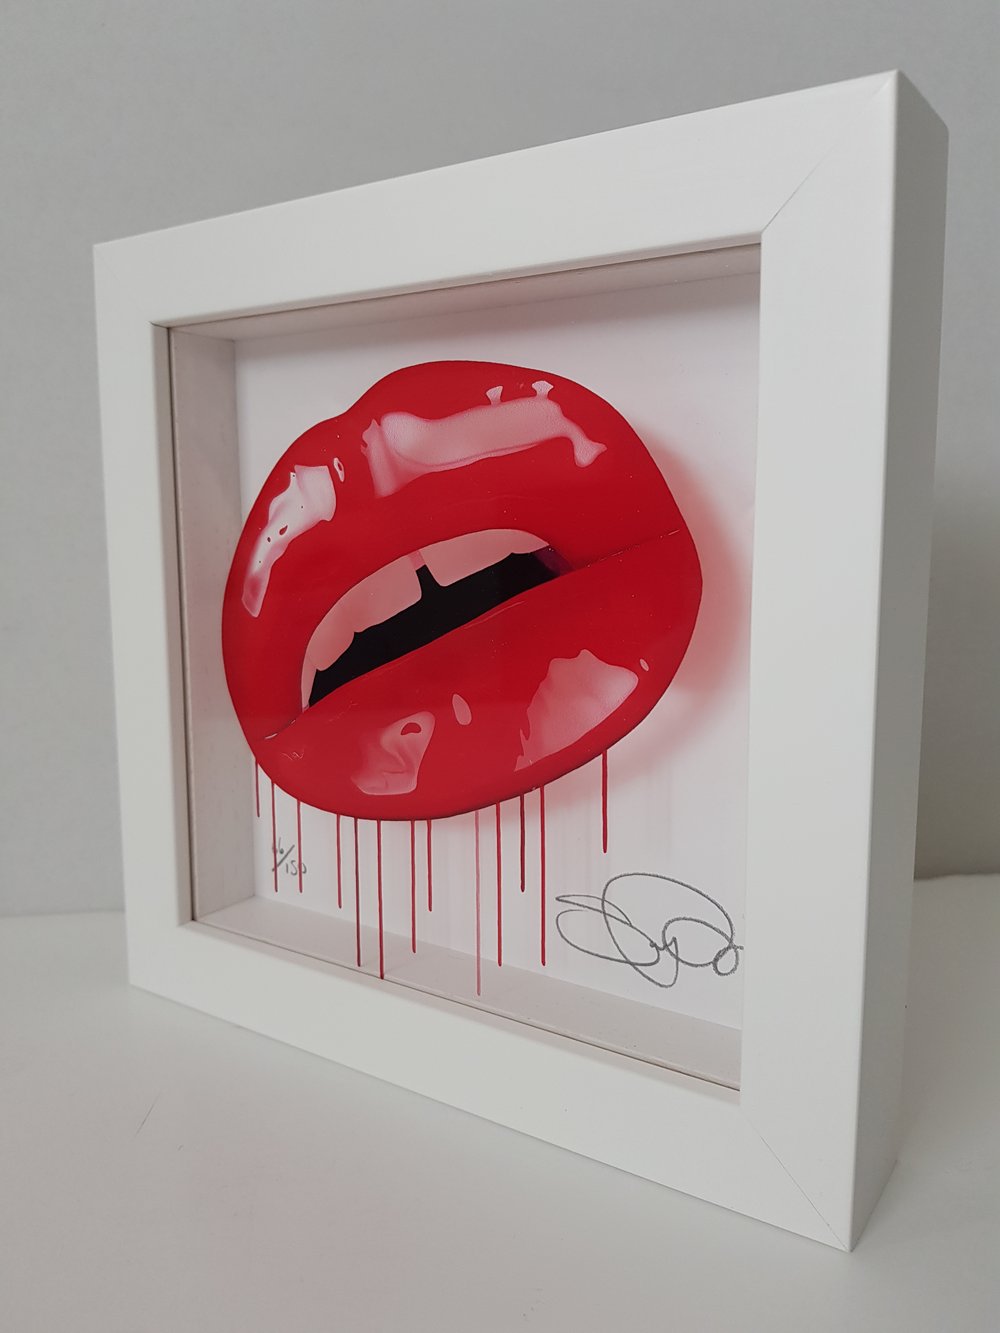 SARA POPE "AMPED" - PRINT ON GLASS, IN WHITE BOX FRAME - LIMITED EDITION OF 150